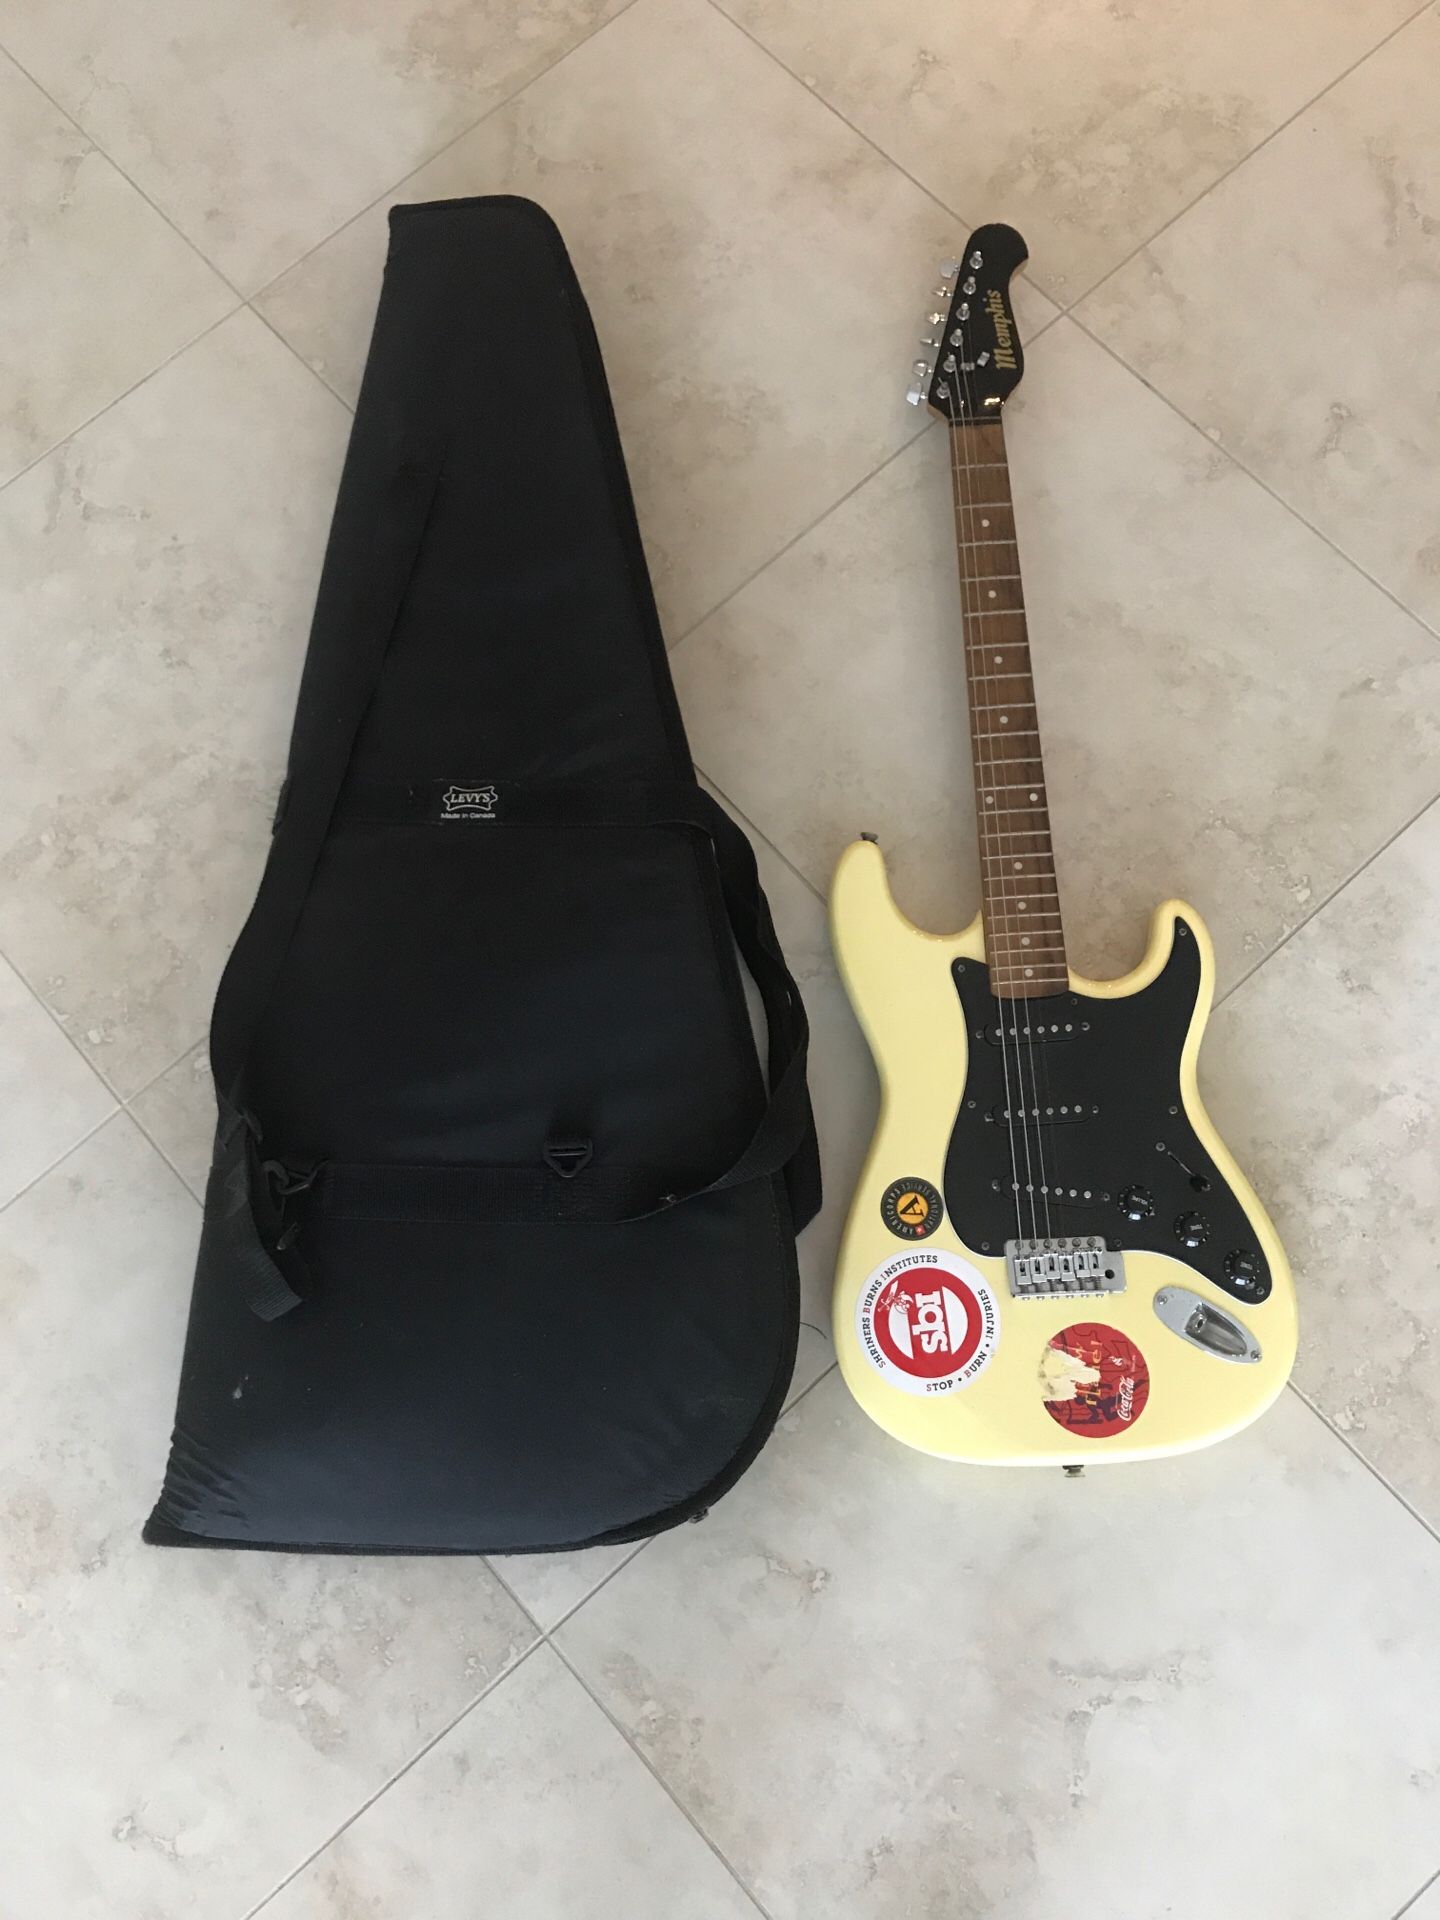 Electric guitar and case